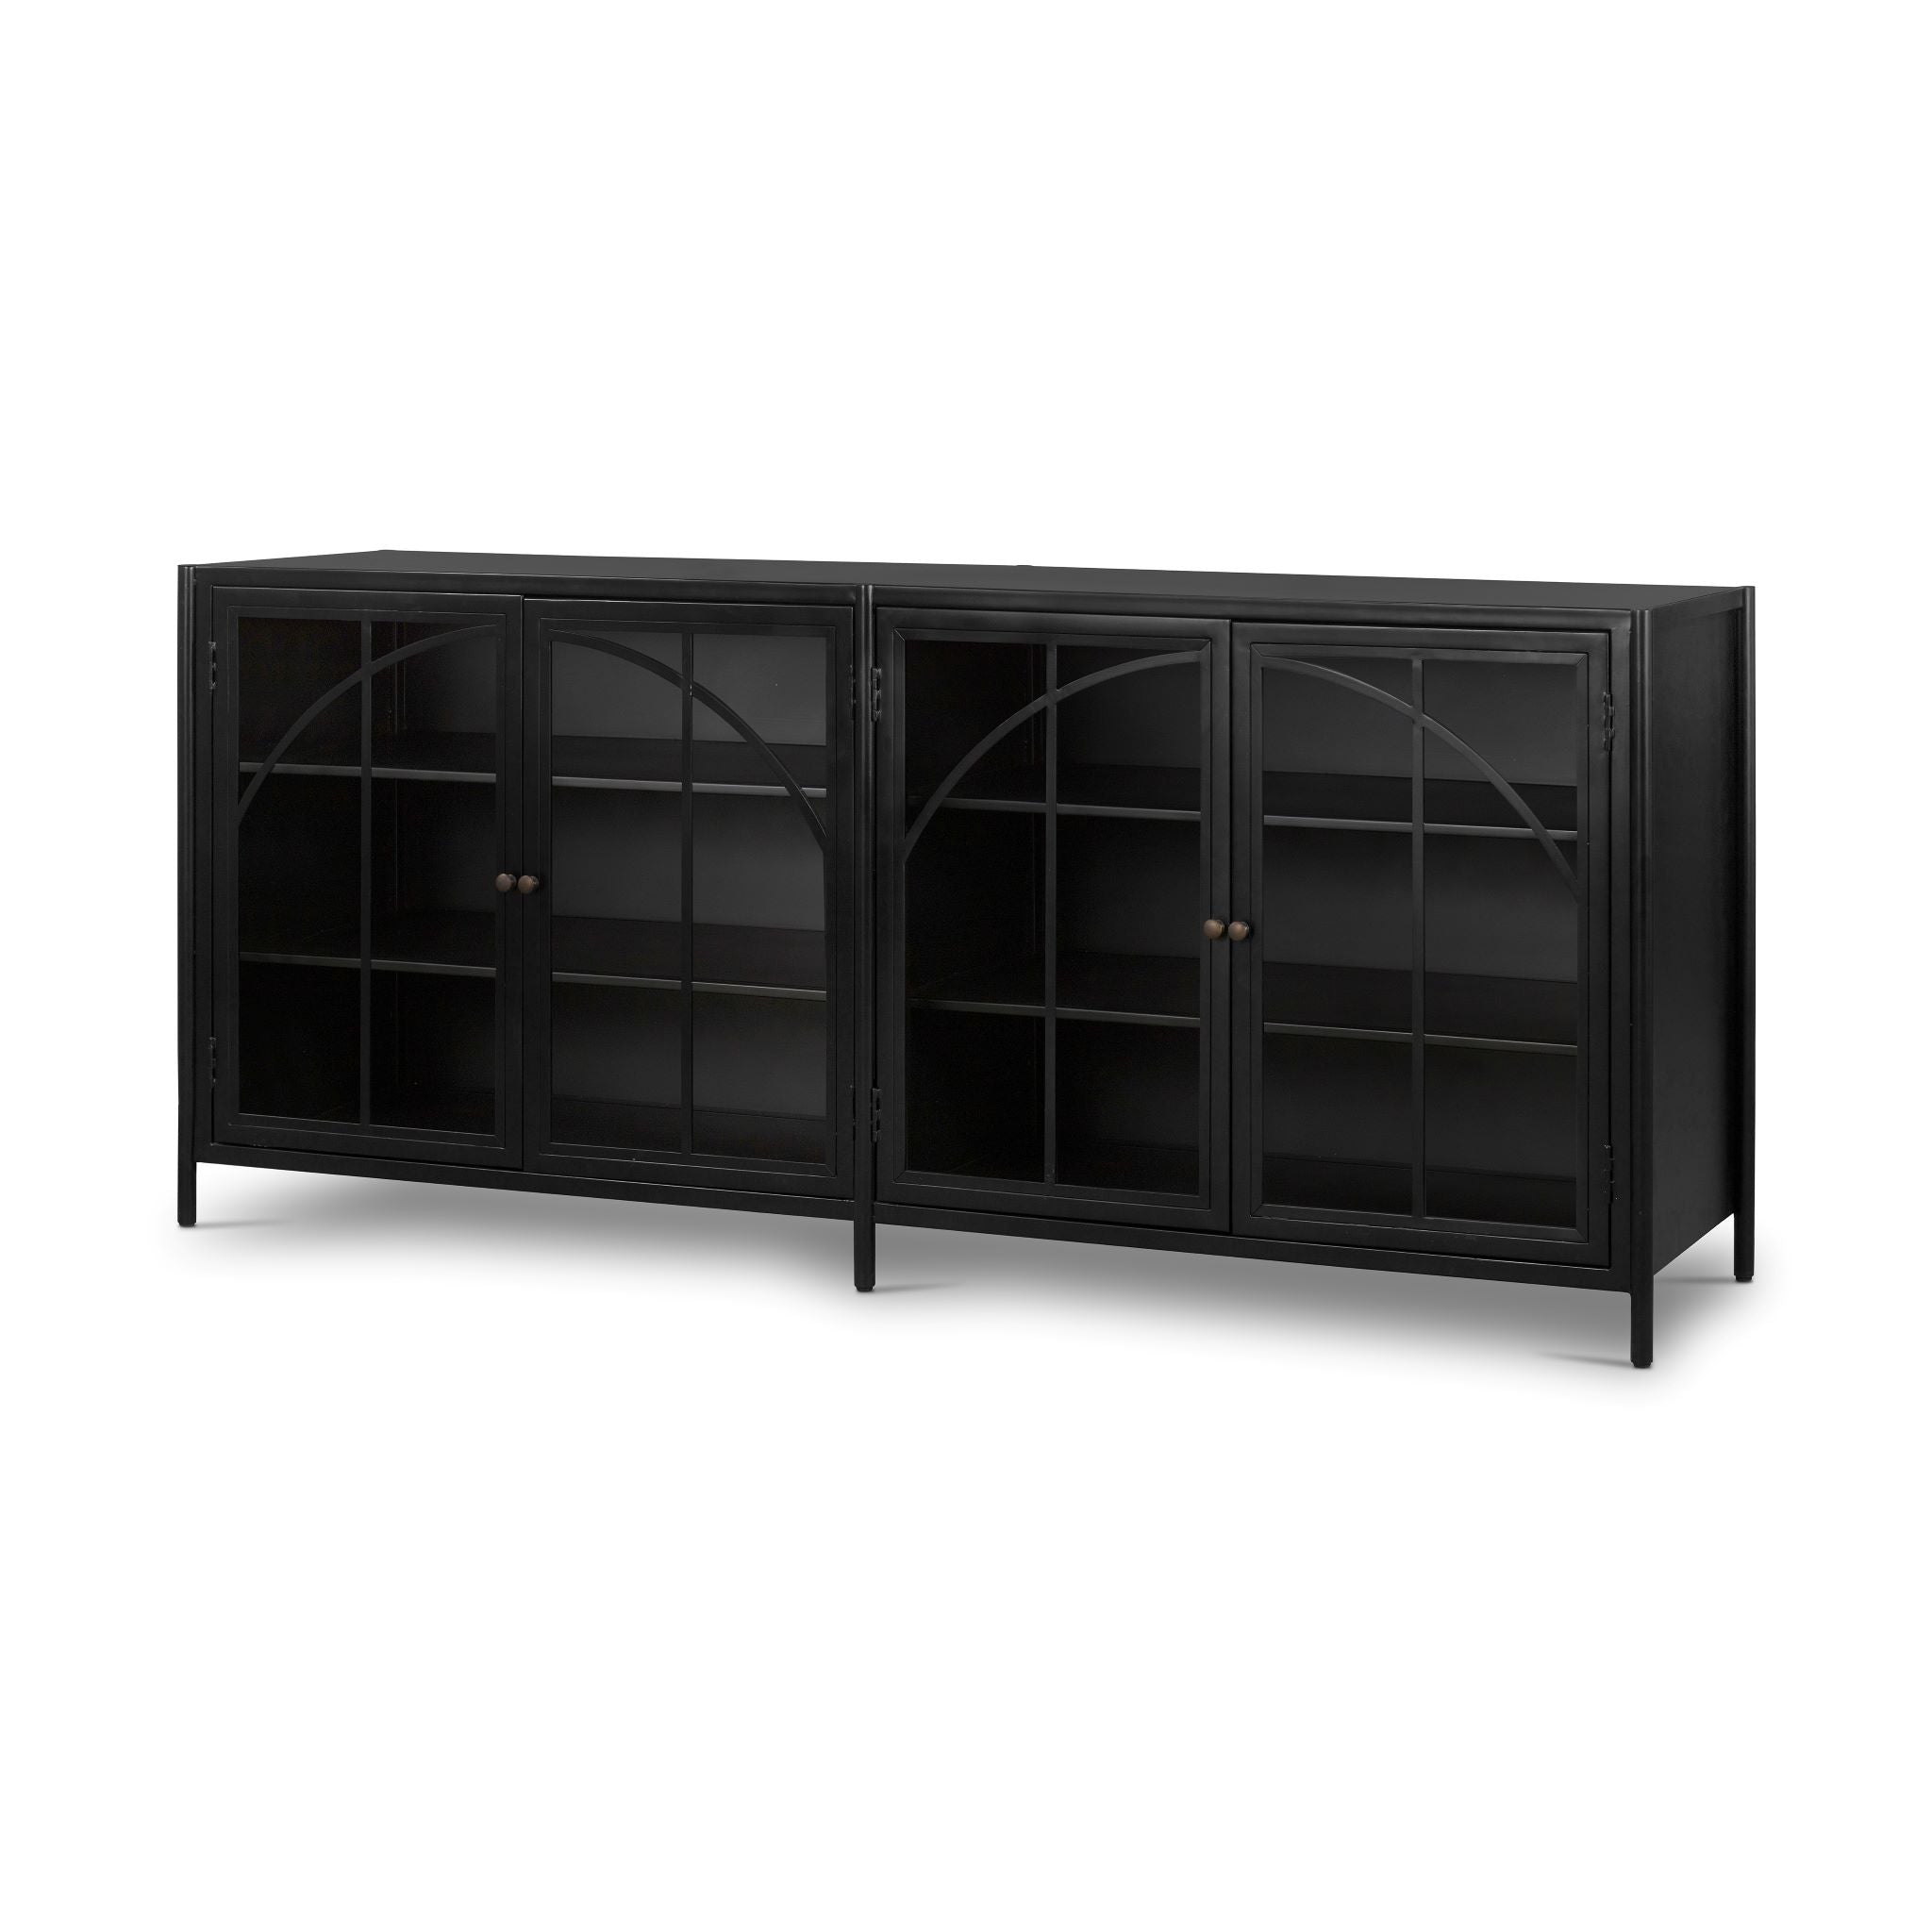 Gristmill Sideboard - Magnolia